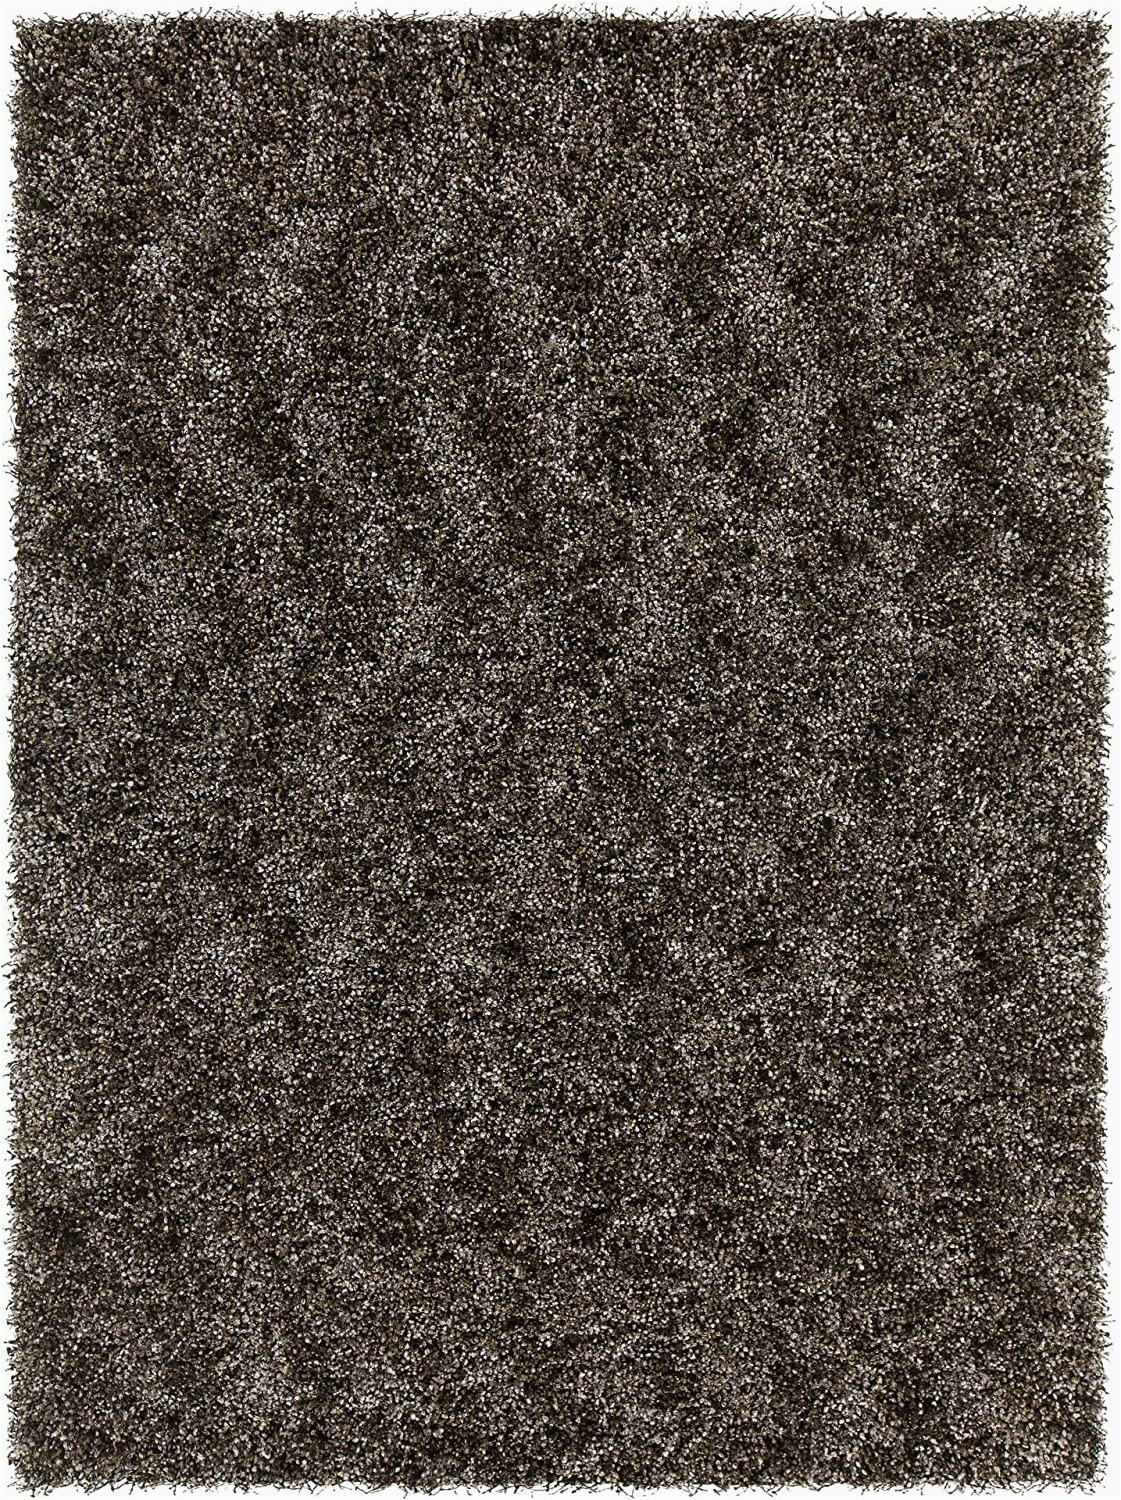 30 X 60 area Rugs Amazon Chandra Rugs Blossom area Rug 60 Inch by 84